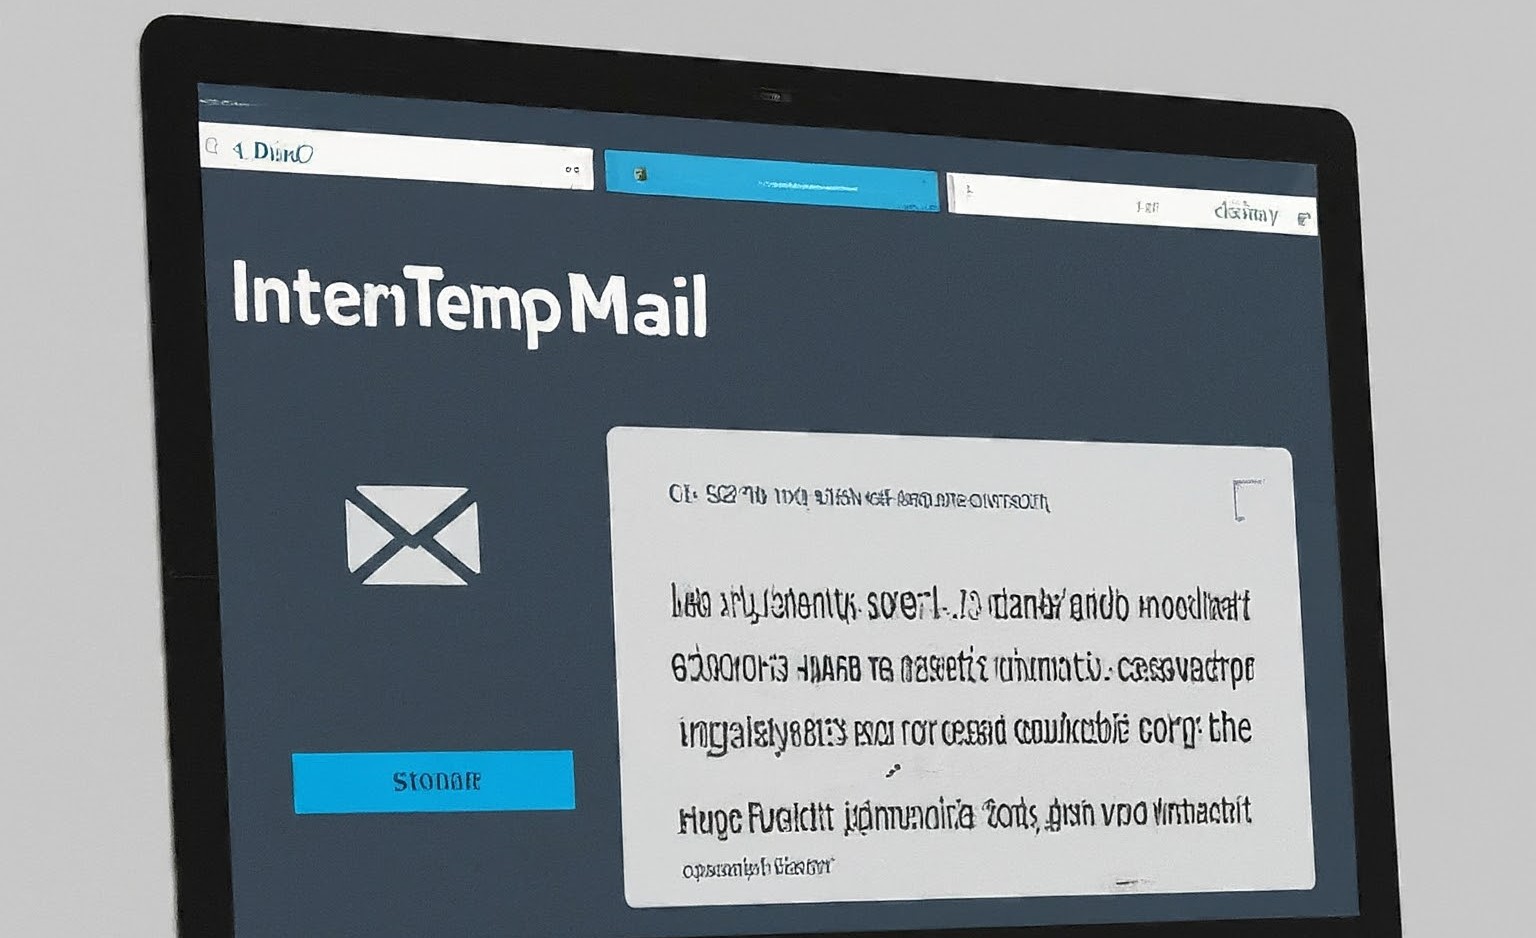 The Best Internxt Temp Mail: Protect Your Privacy & Avoid Spam